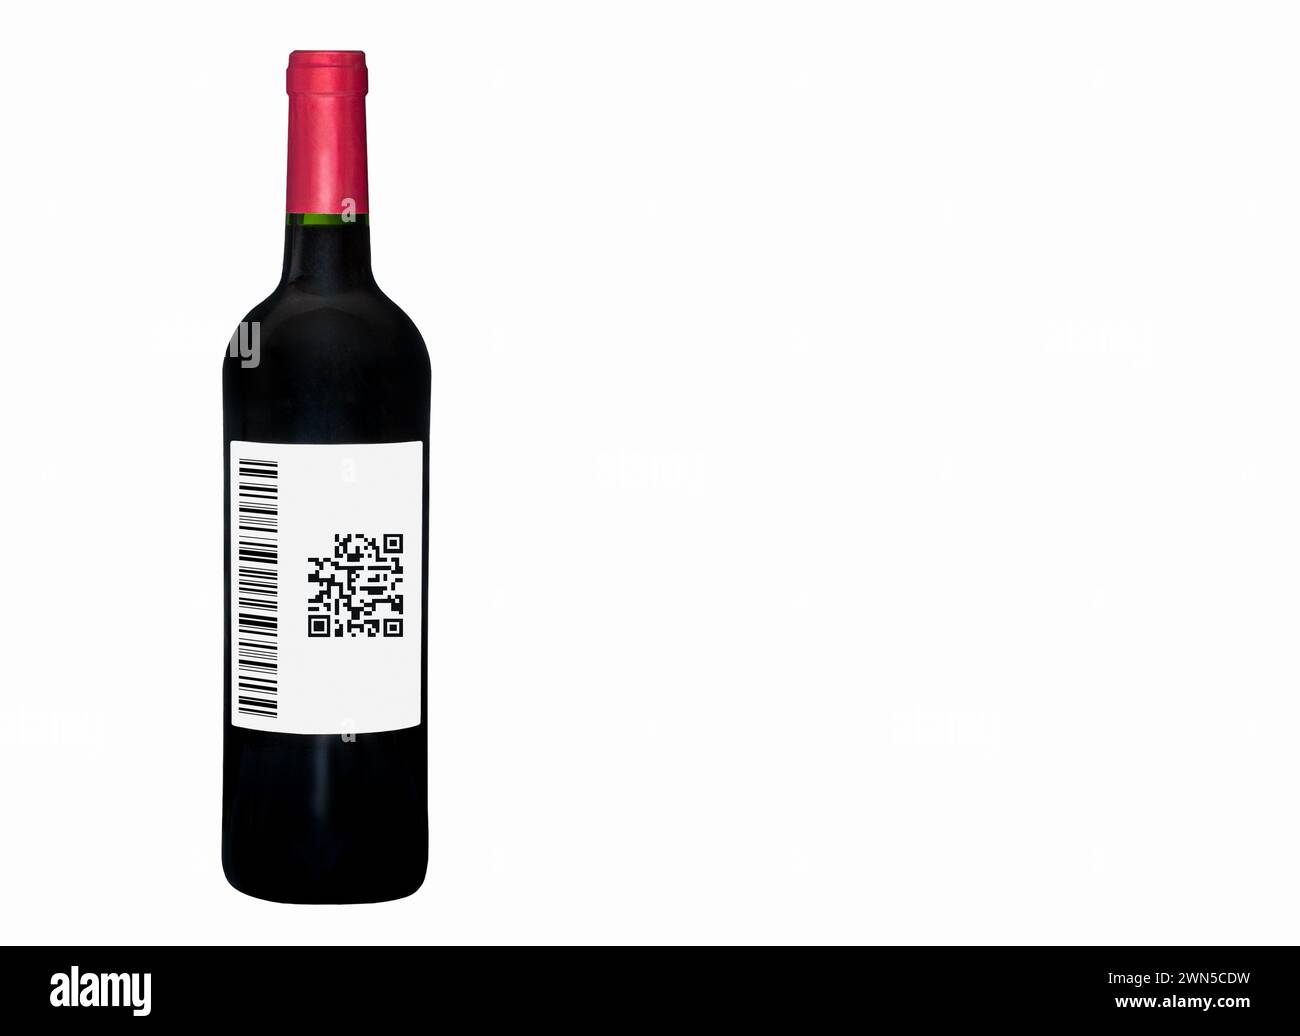 Isolated red wine bottle and illustration of qr and bar codes on label. E-labeling for wine and alcohol industry. Stock Photo